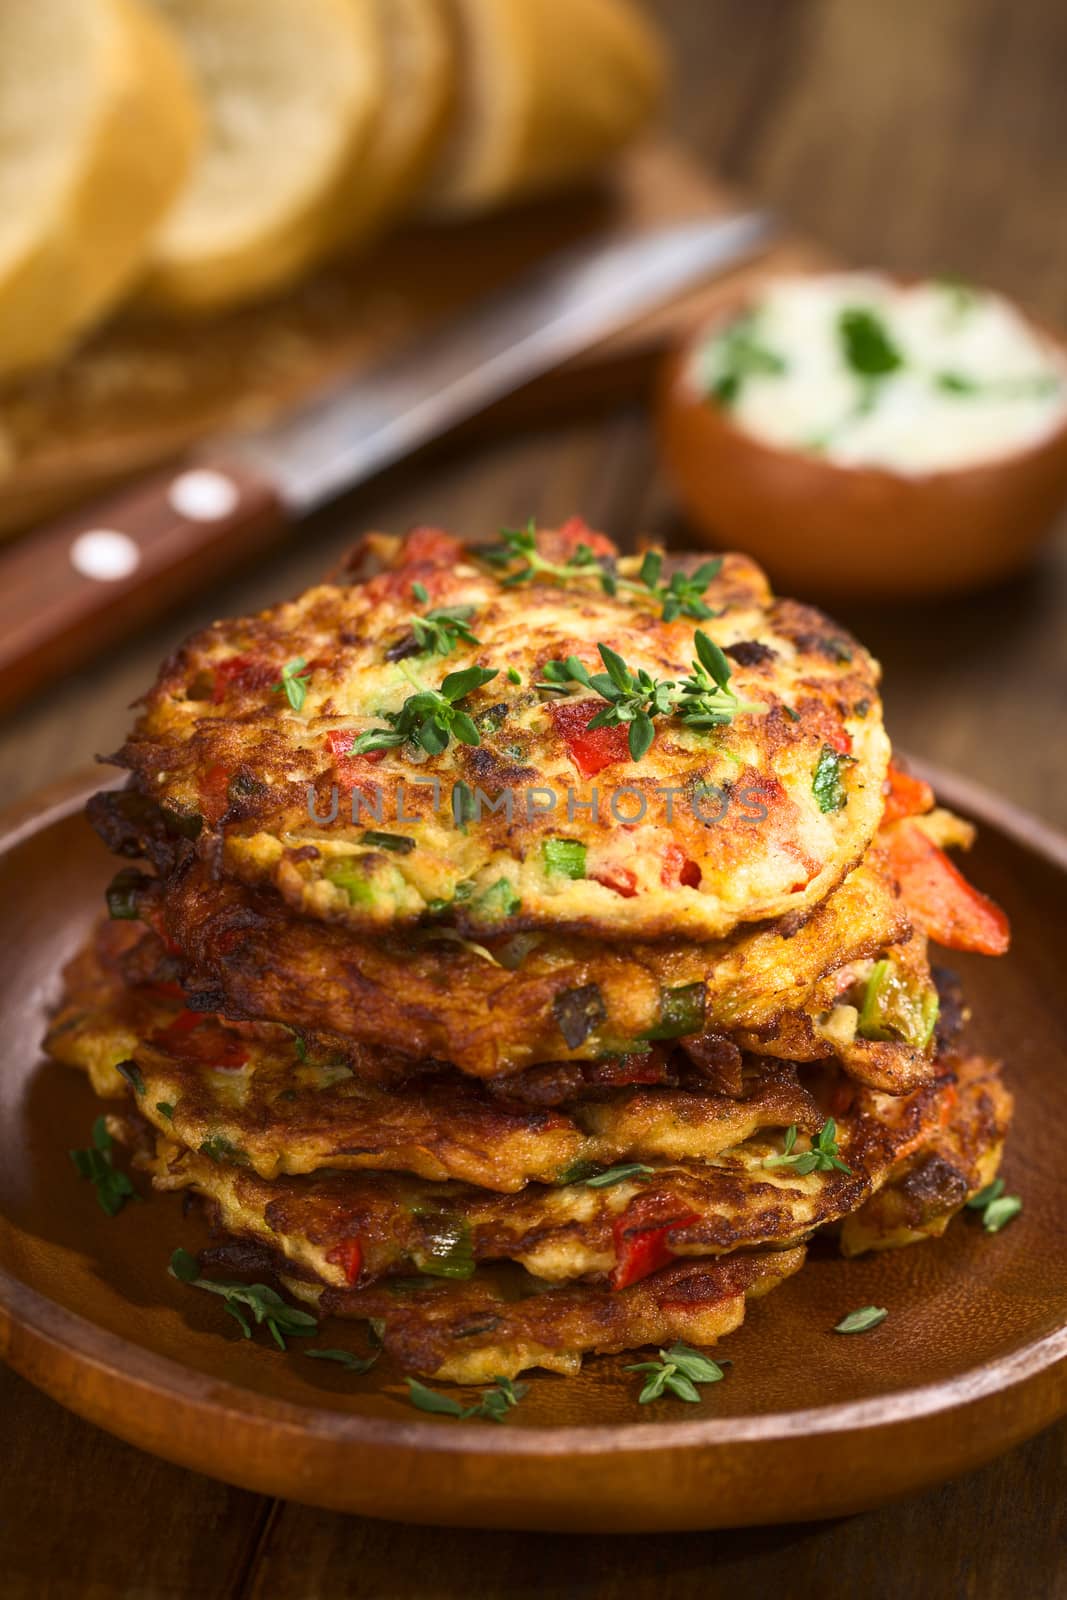 Zucchini and Bell Pepper Fritter by ildi